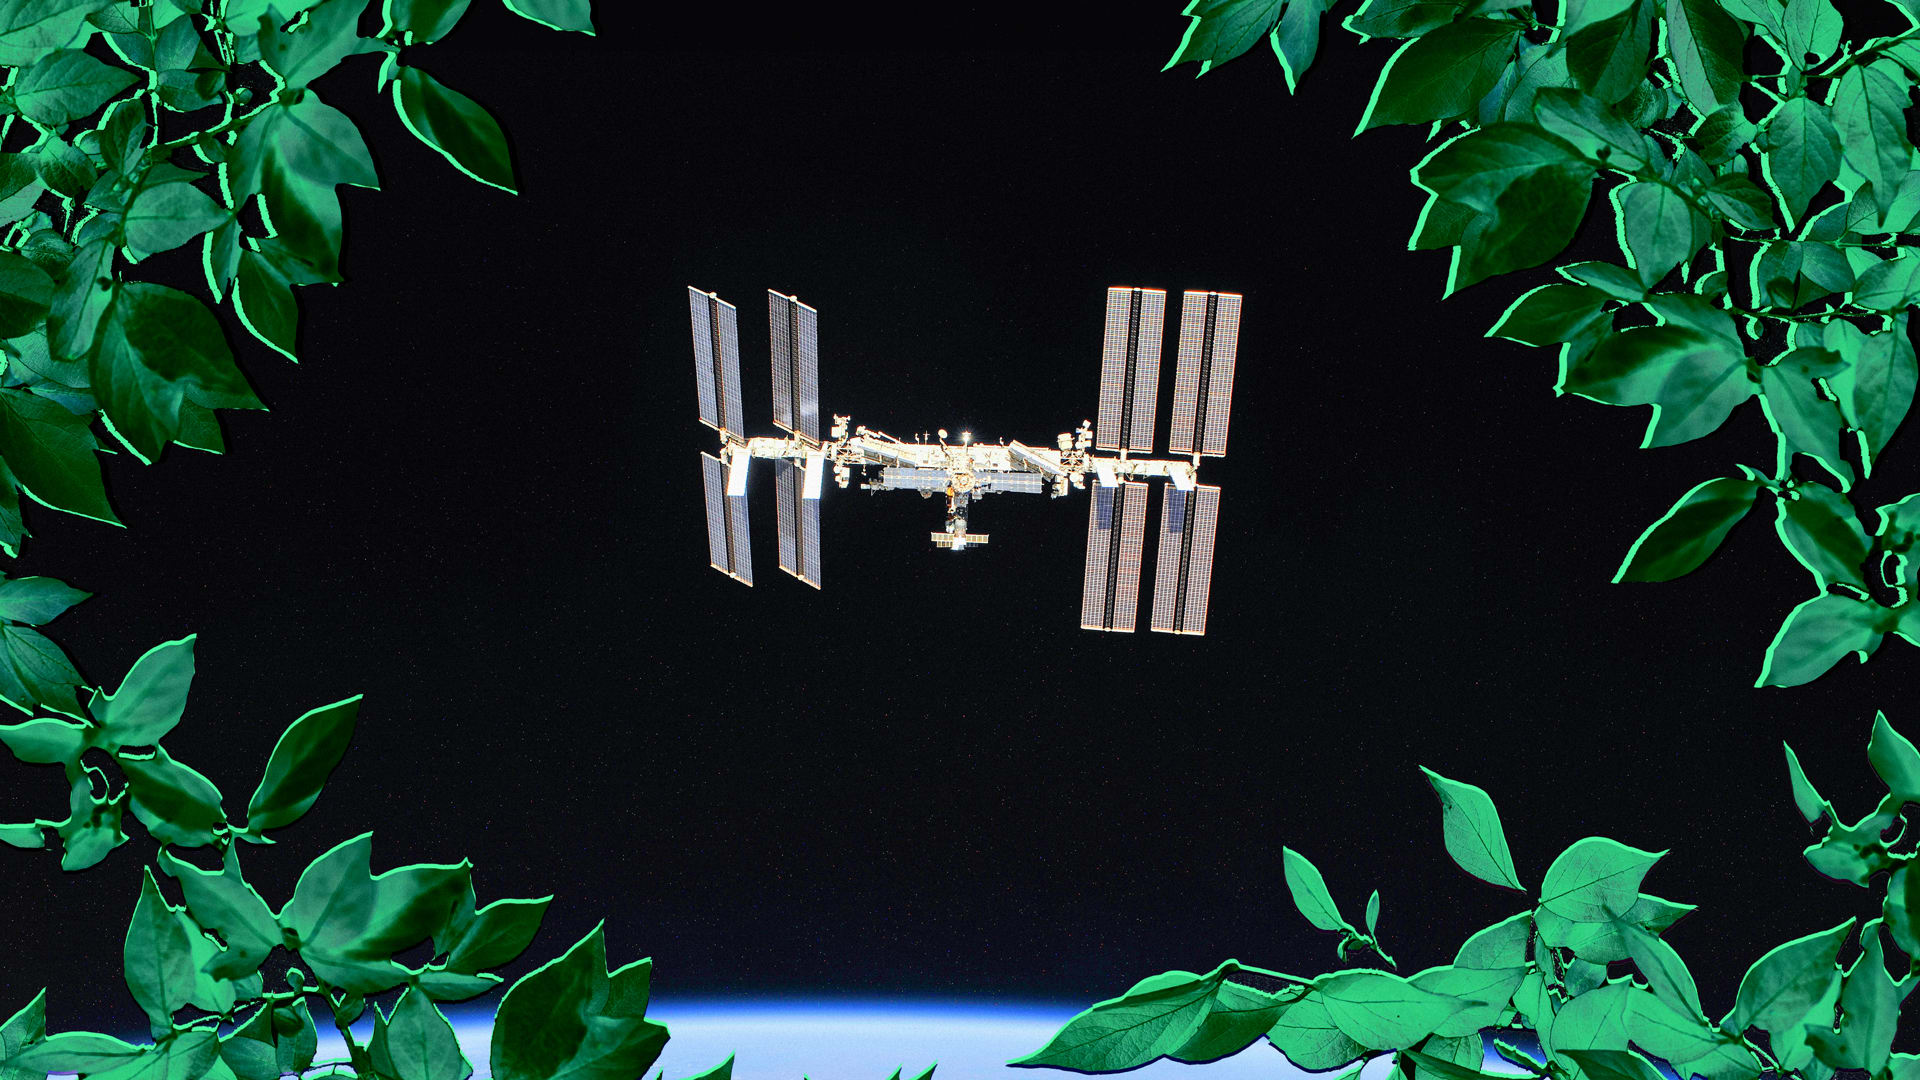 The first commercial greenhouse in space could take flight as soon as 2023